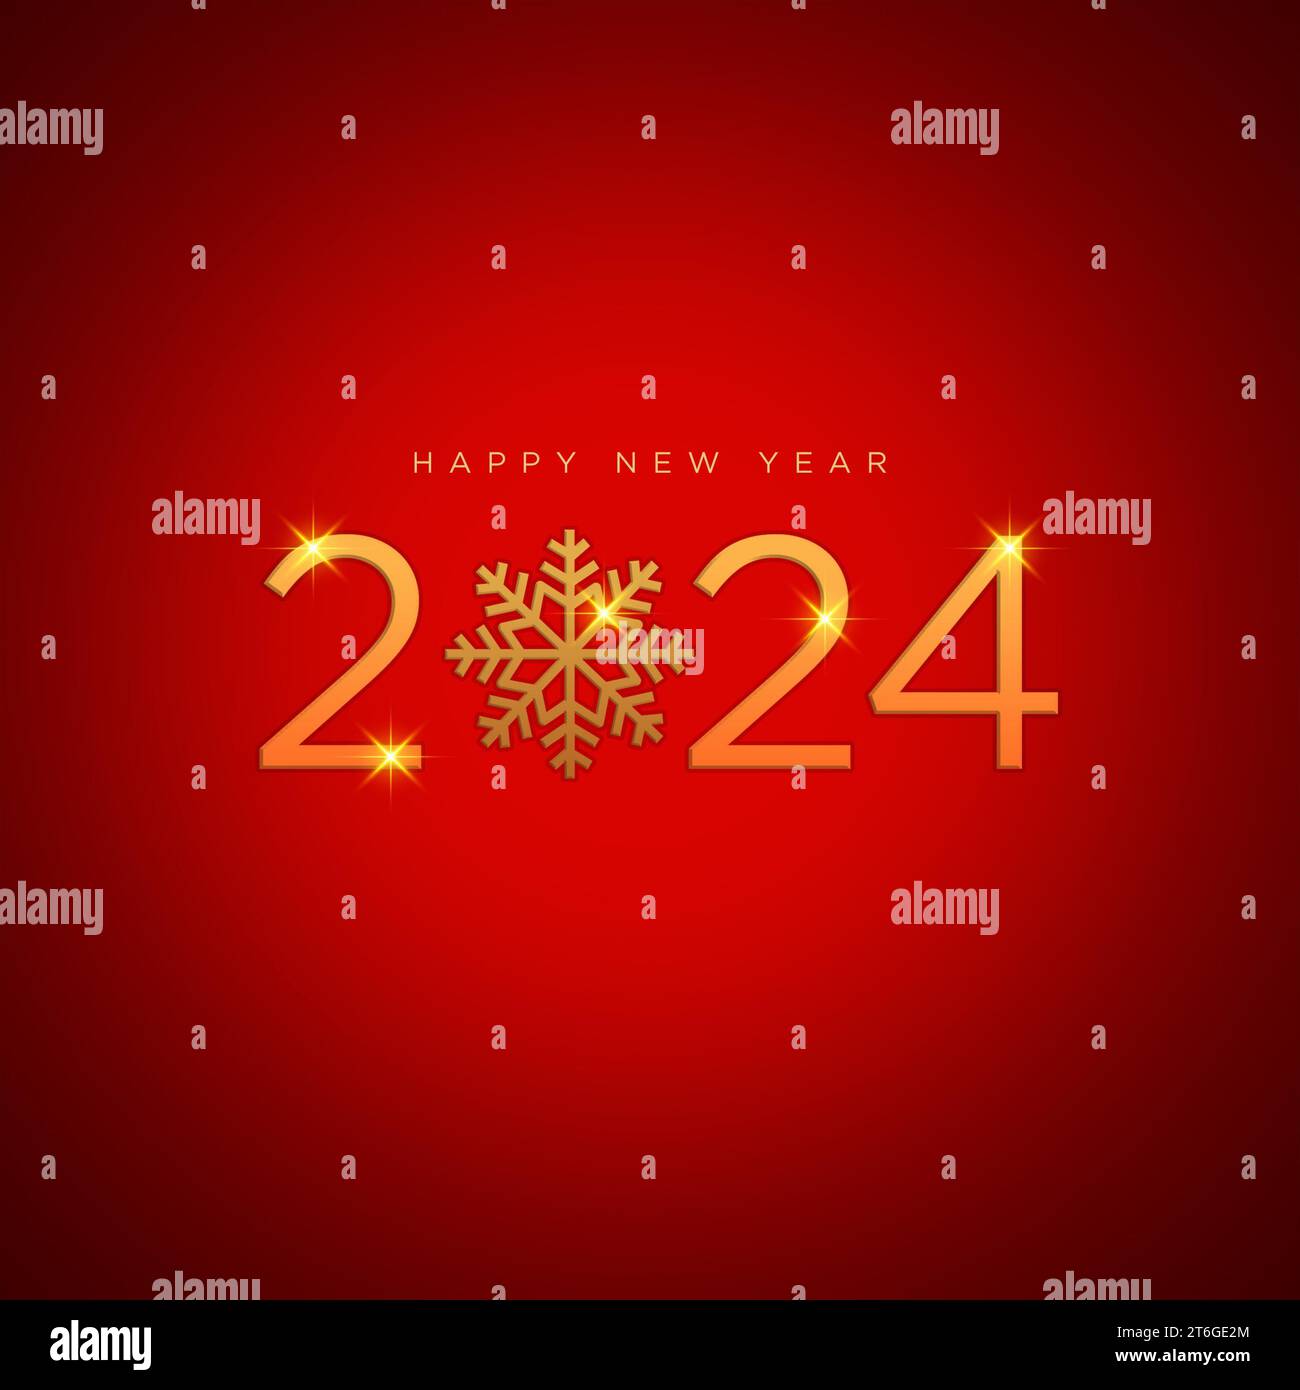 2024 New Year Celebration Concept. Happy New Year Social Post Card. #2024 Stock Photo